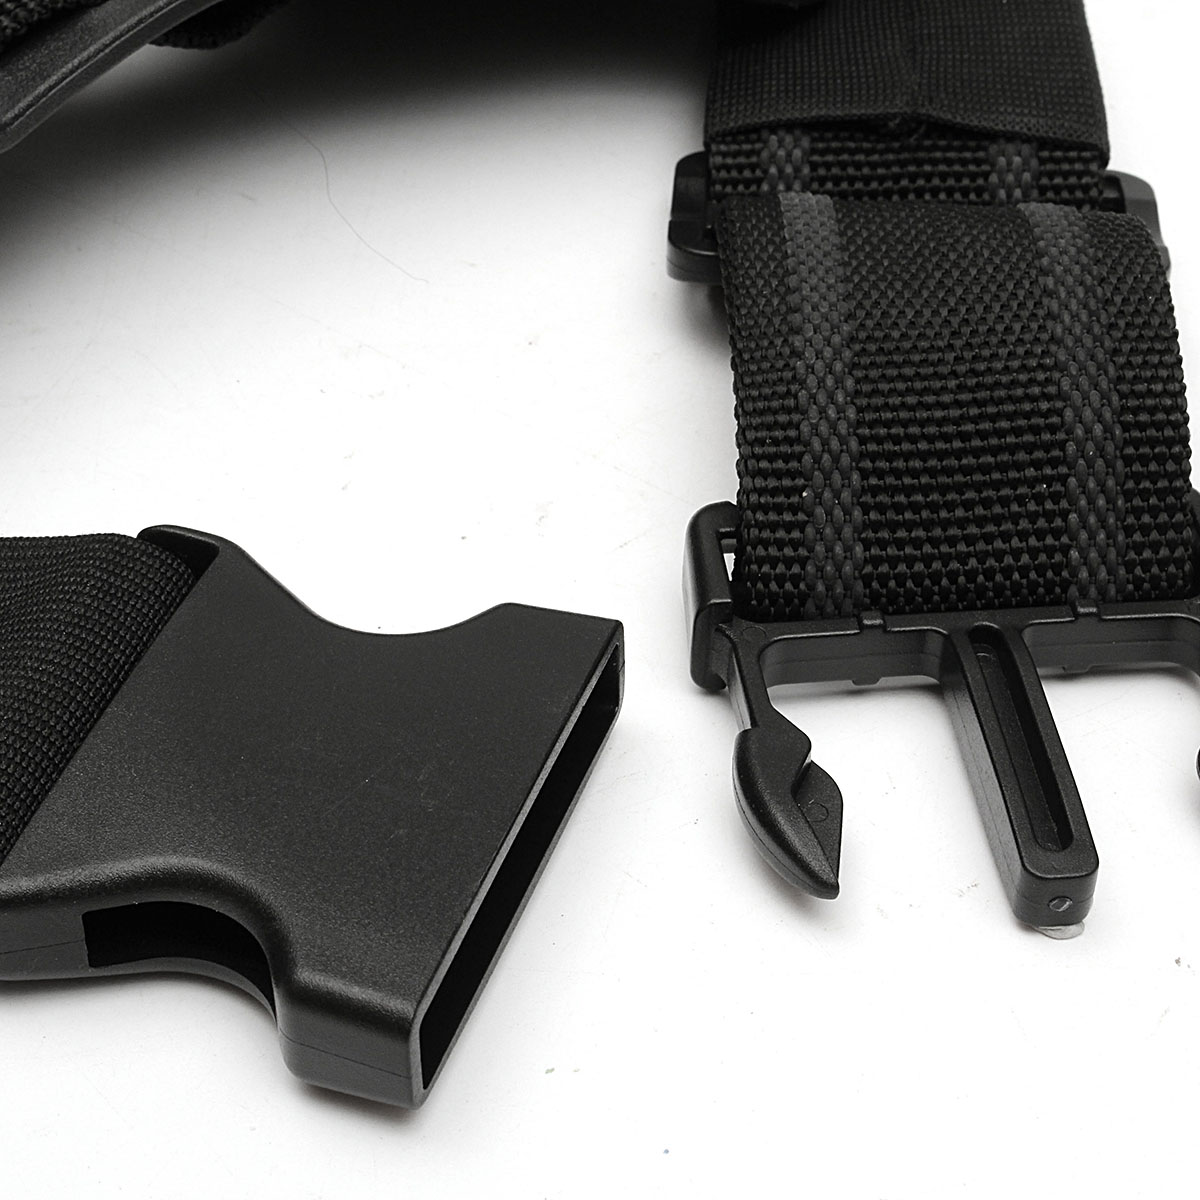 Tactical-Drop-Leg-Thigh-Rig-Holster-Platform-Panel-Plate-For-SERPA-CQC-Holsters-1243352-4